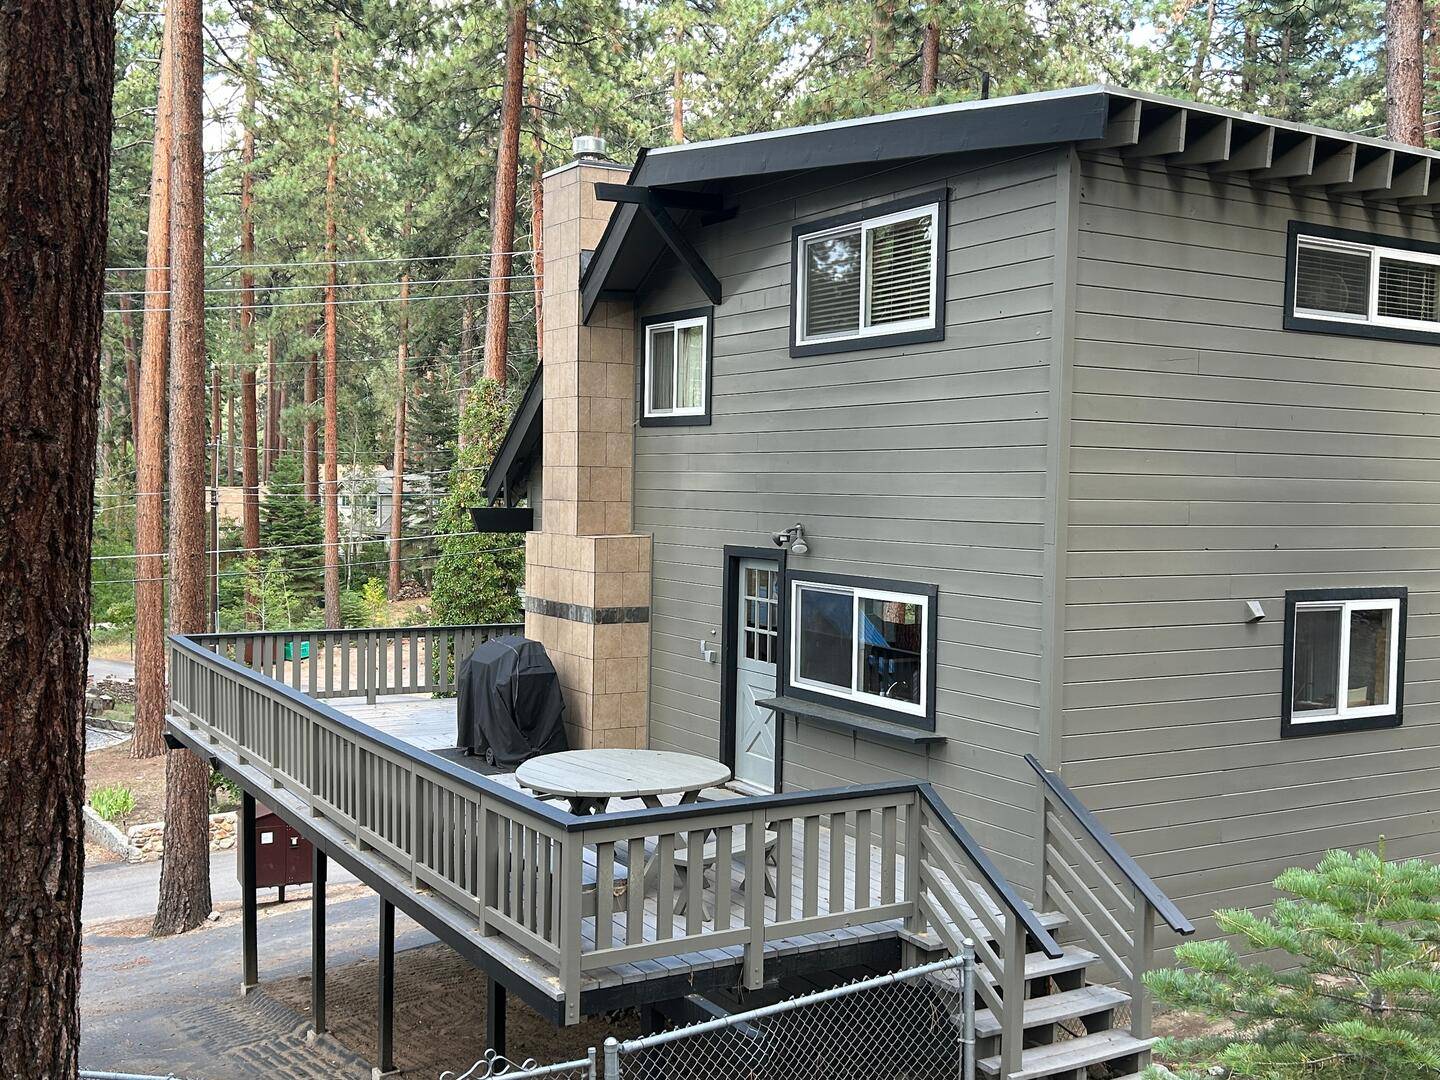 Zephyr Cove Vacation Rental